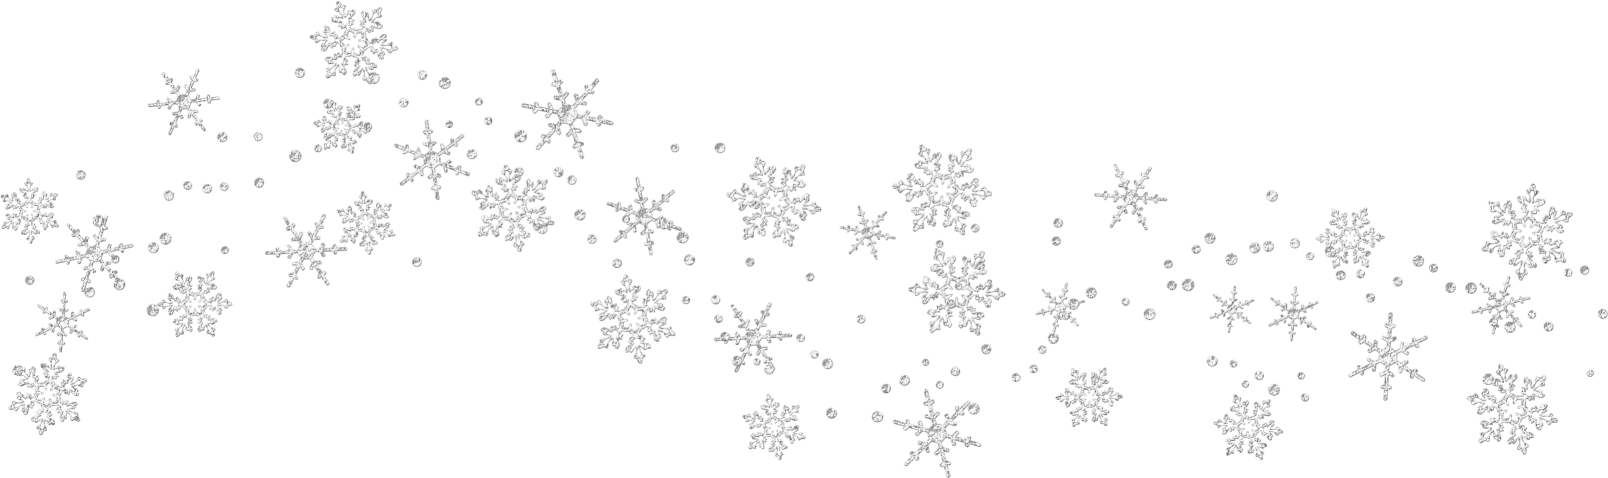 Snow Falling PNG Images